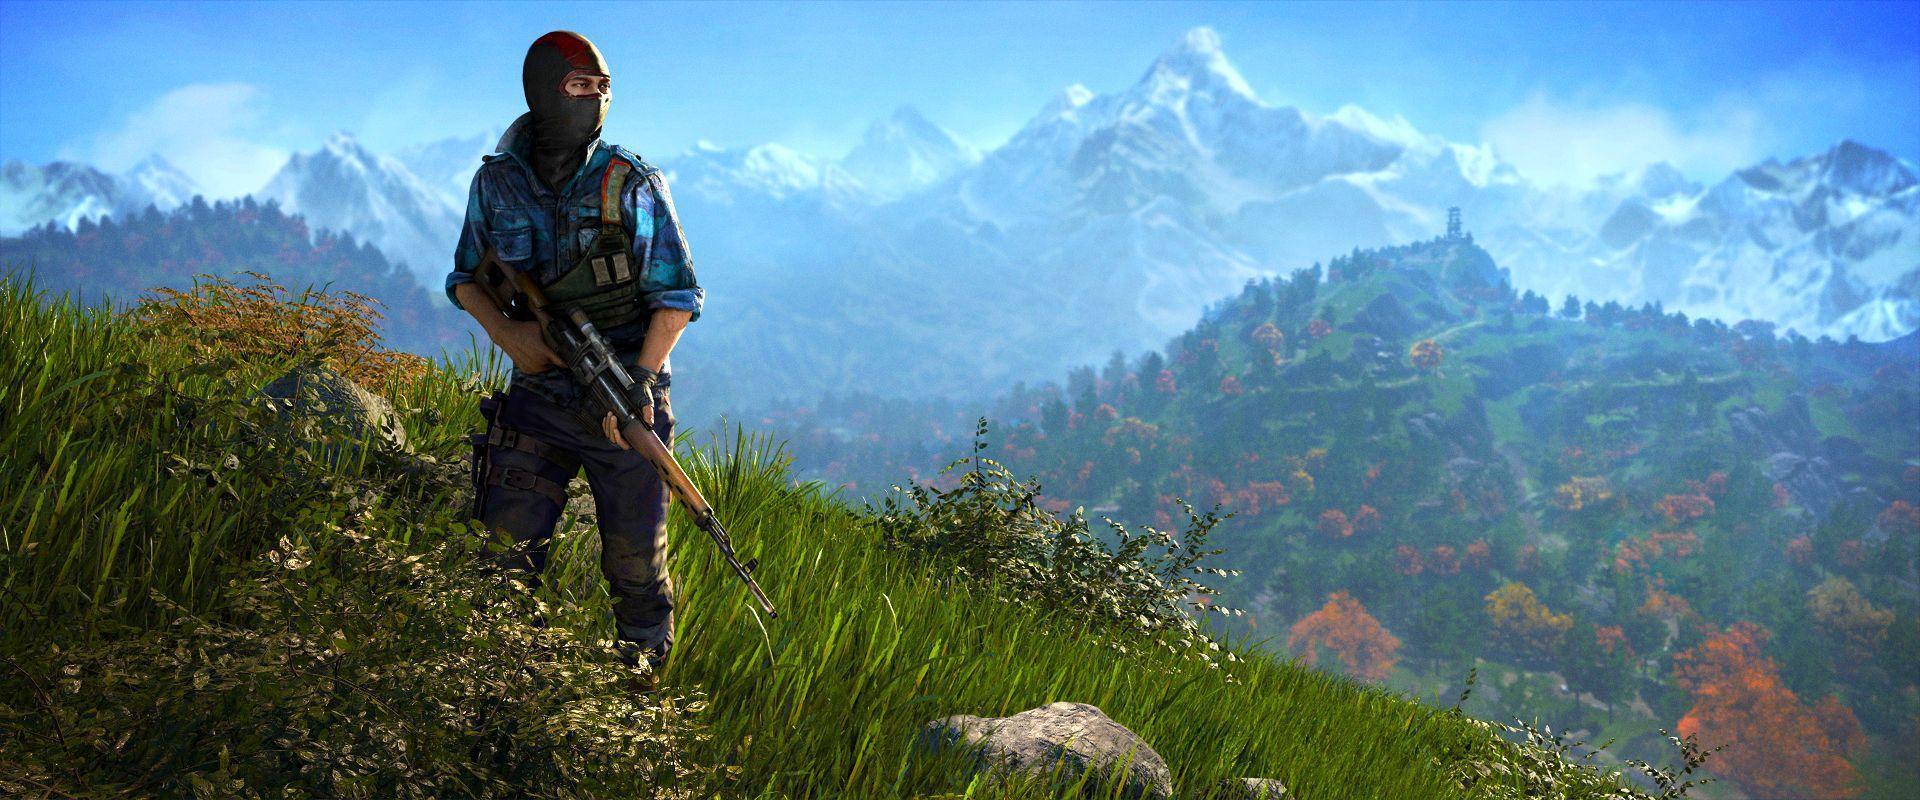 Far Cry 4 Himalaya wallpapers – wallpapers free download